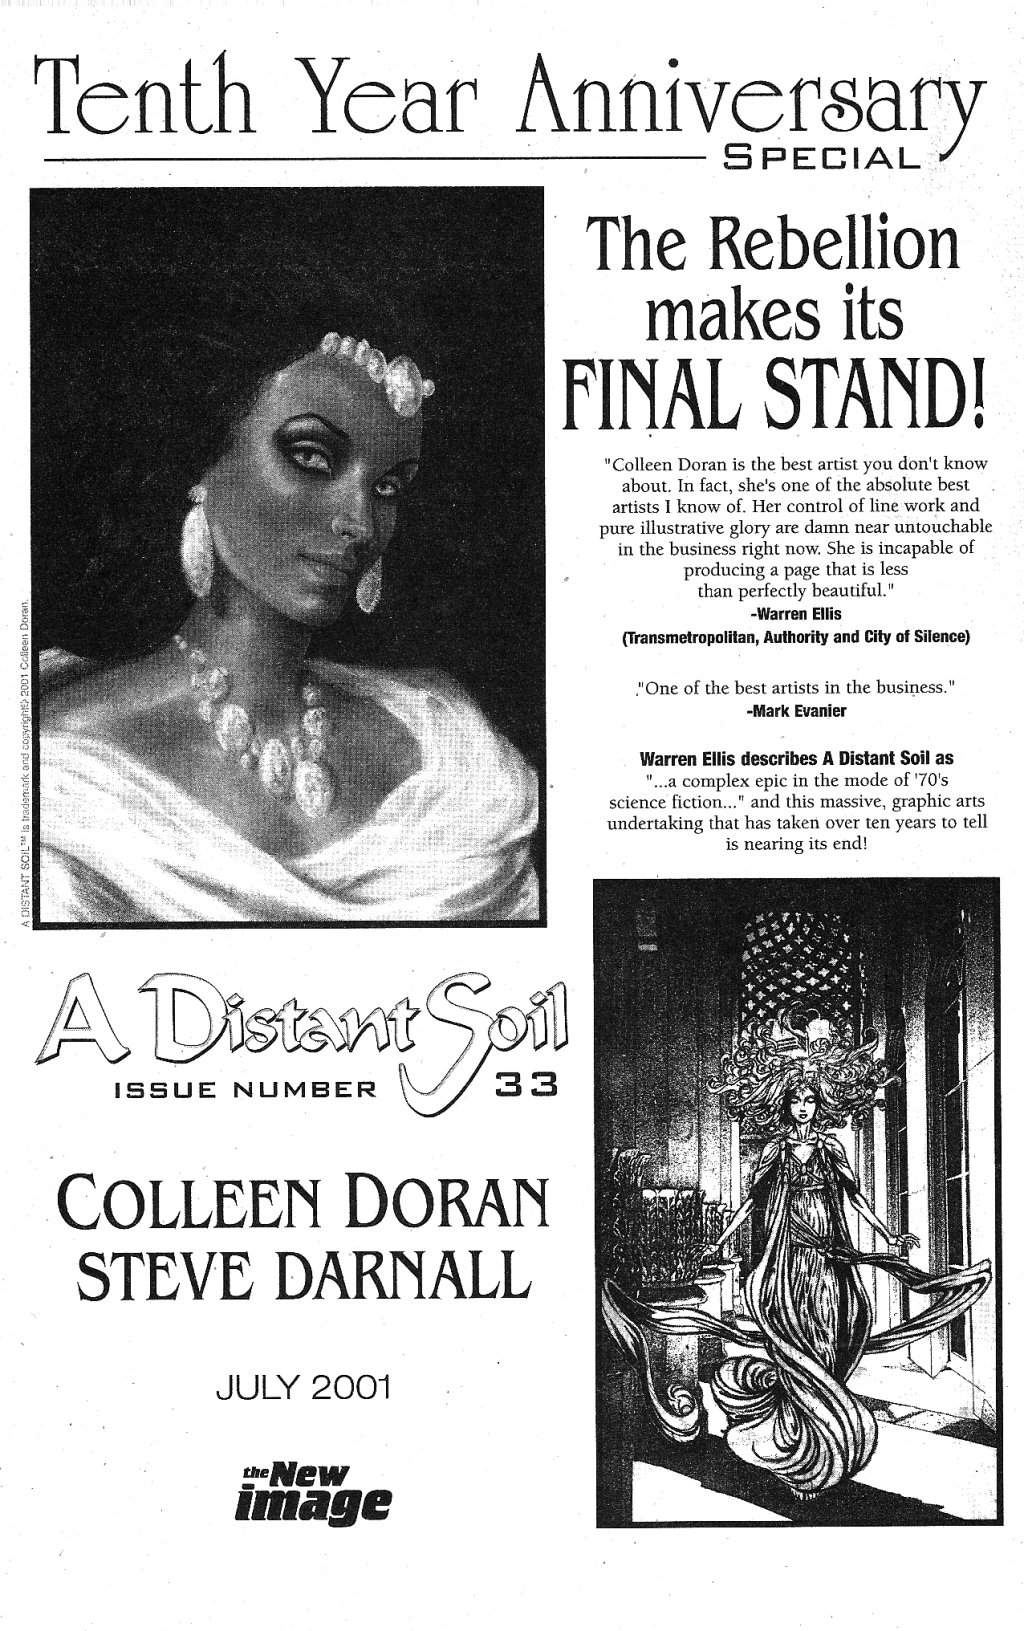 Read online A Distant Soil comic -  Issue #32 - 33